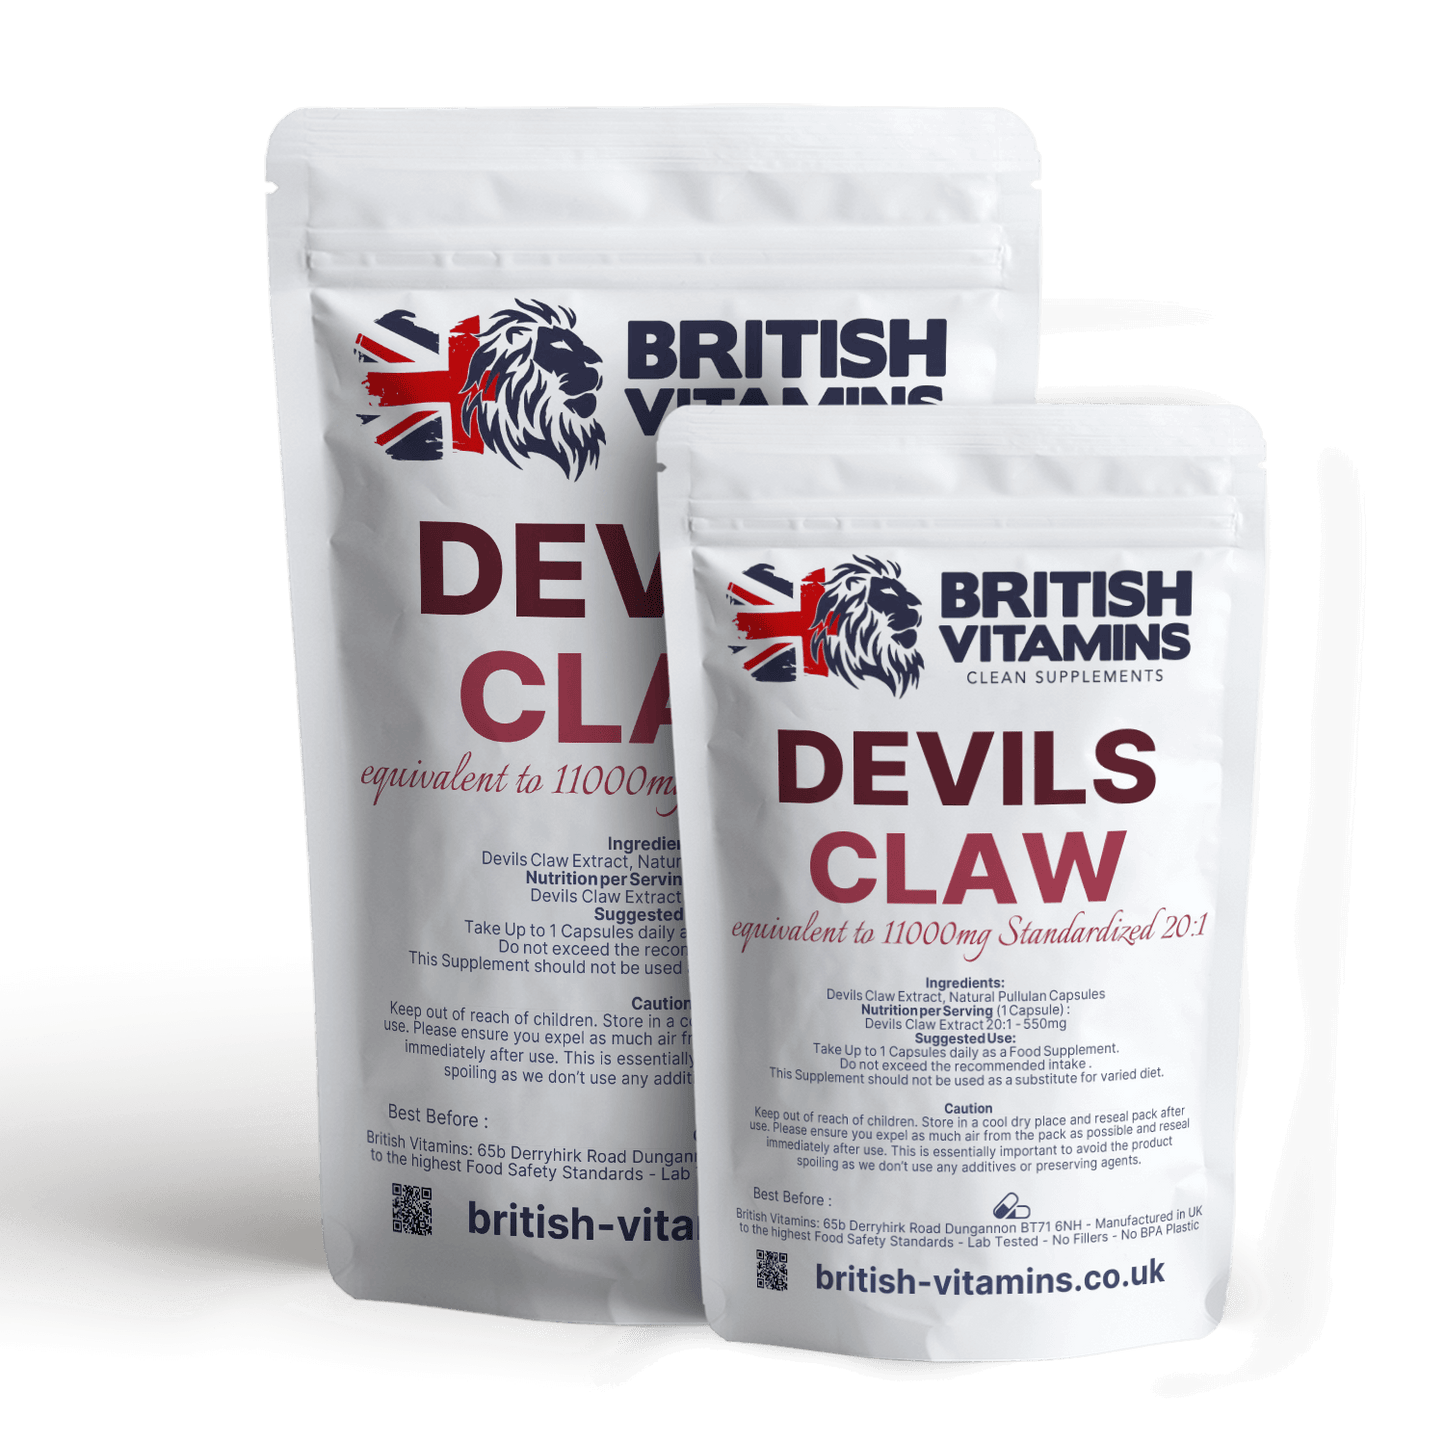 Devils Claw Extract 20:1 11000mg Extract Health & Beauty:Vitamins & Lifestyle Supplements:Vitamins & Minerals British Vitamins 5 Capsules ( Sample )  